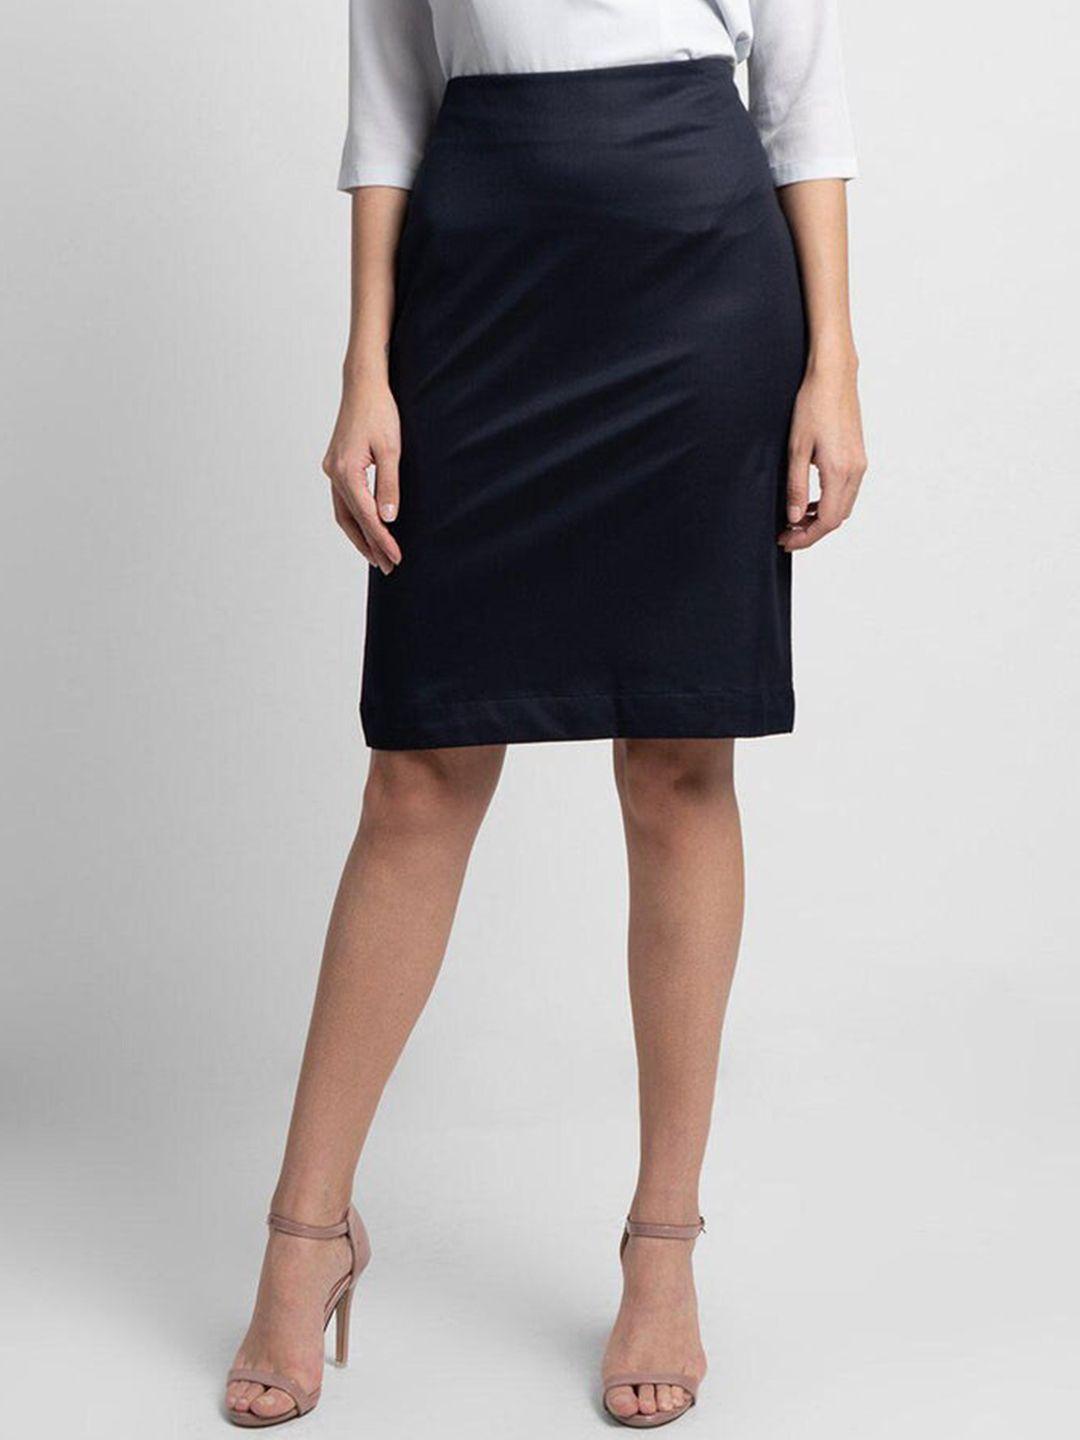 powersutra-women-navy-blue-solid-above-knee-length-skirts